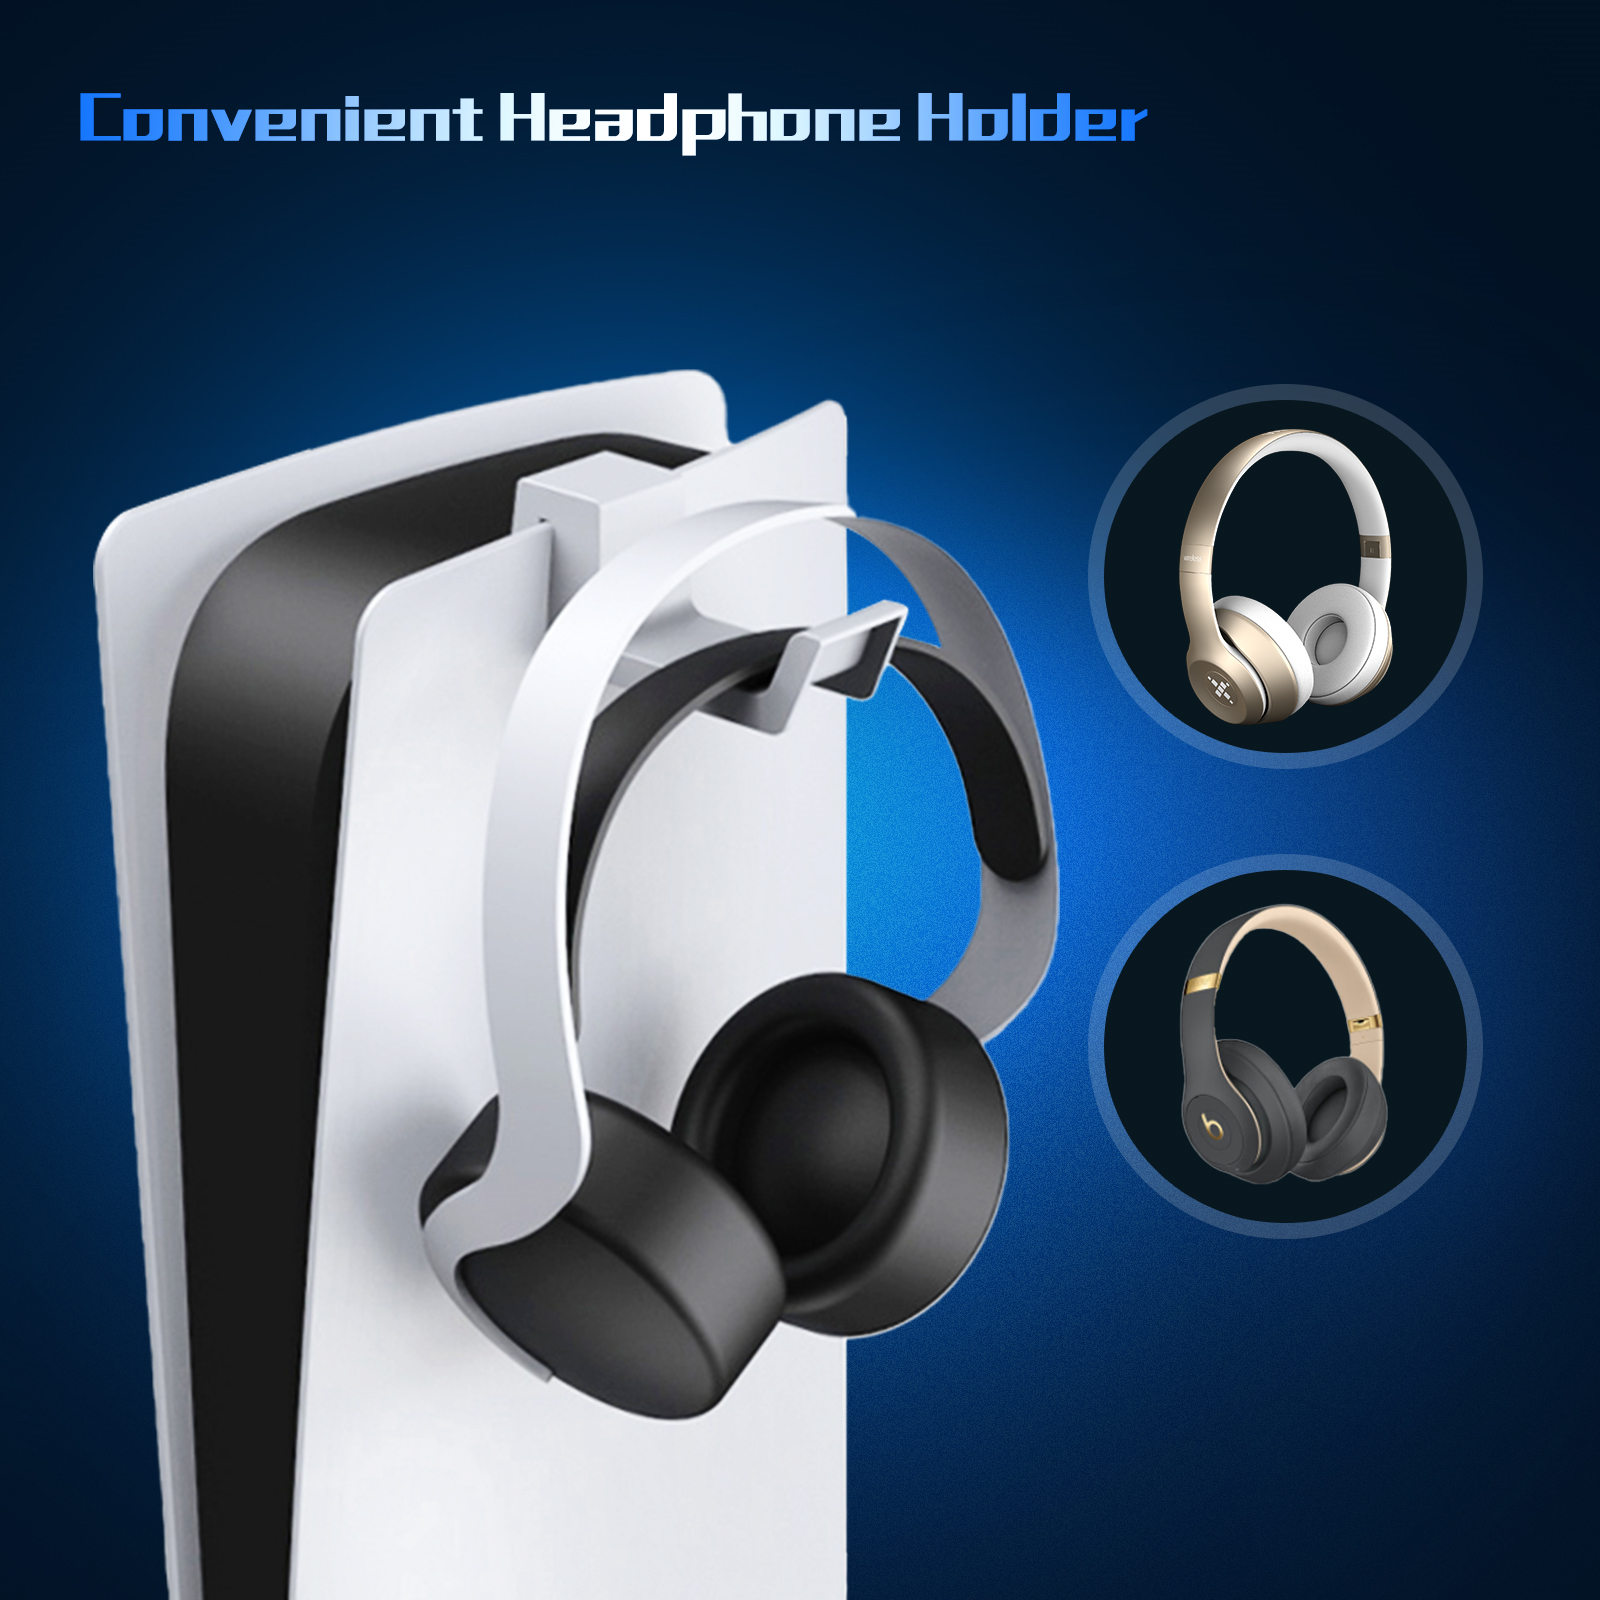 Headphone holder demonstration, compatible with over-ear headphones